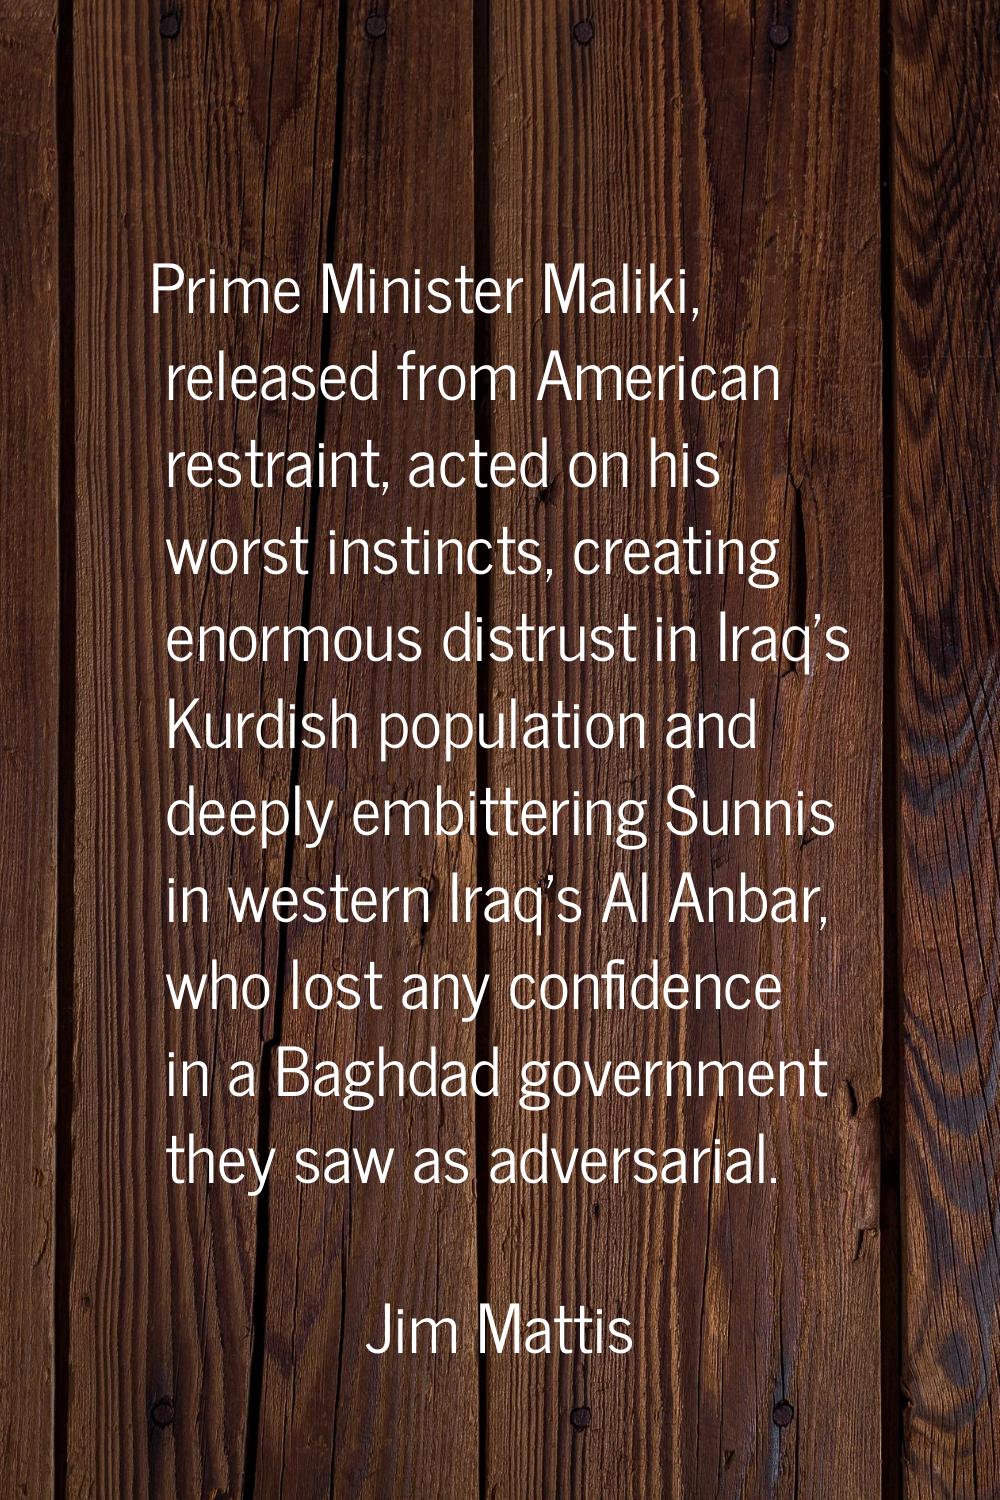 Prime Minister Maliki, released from American restraint, acted on his worst instincts, creating eno